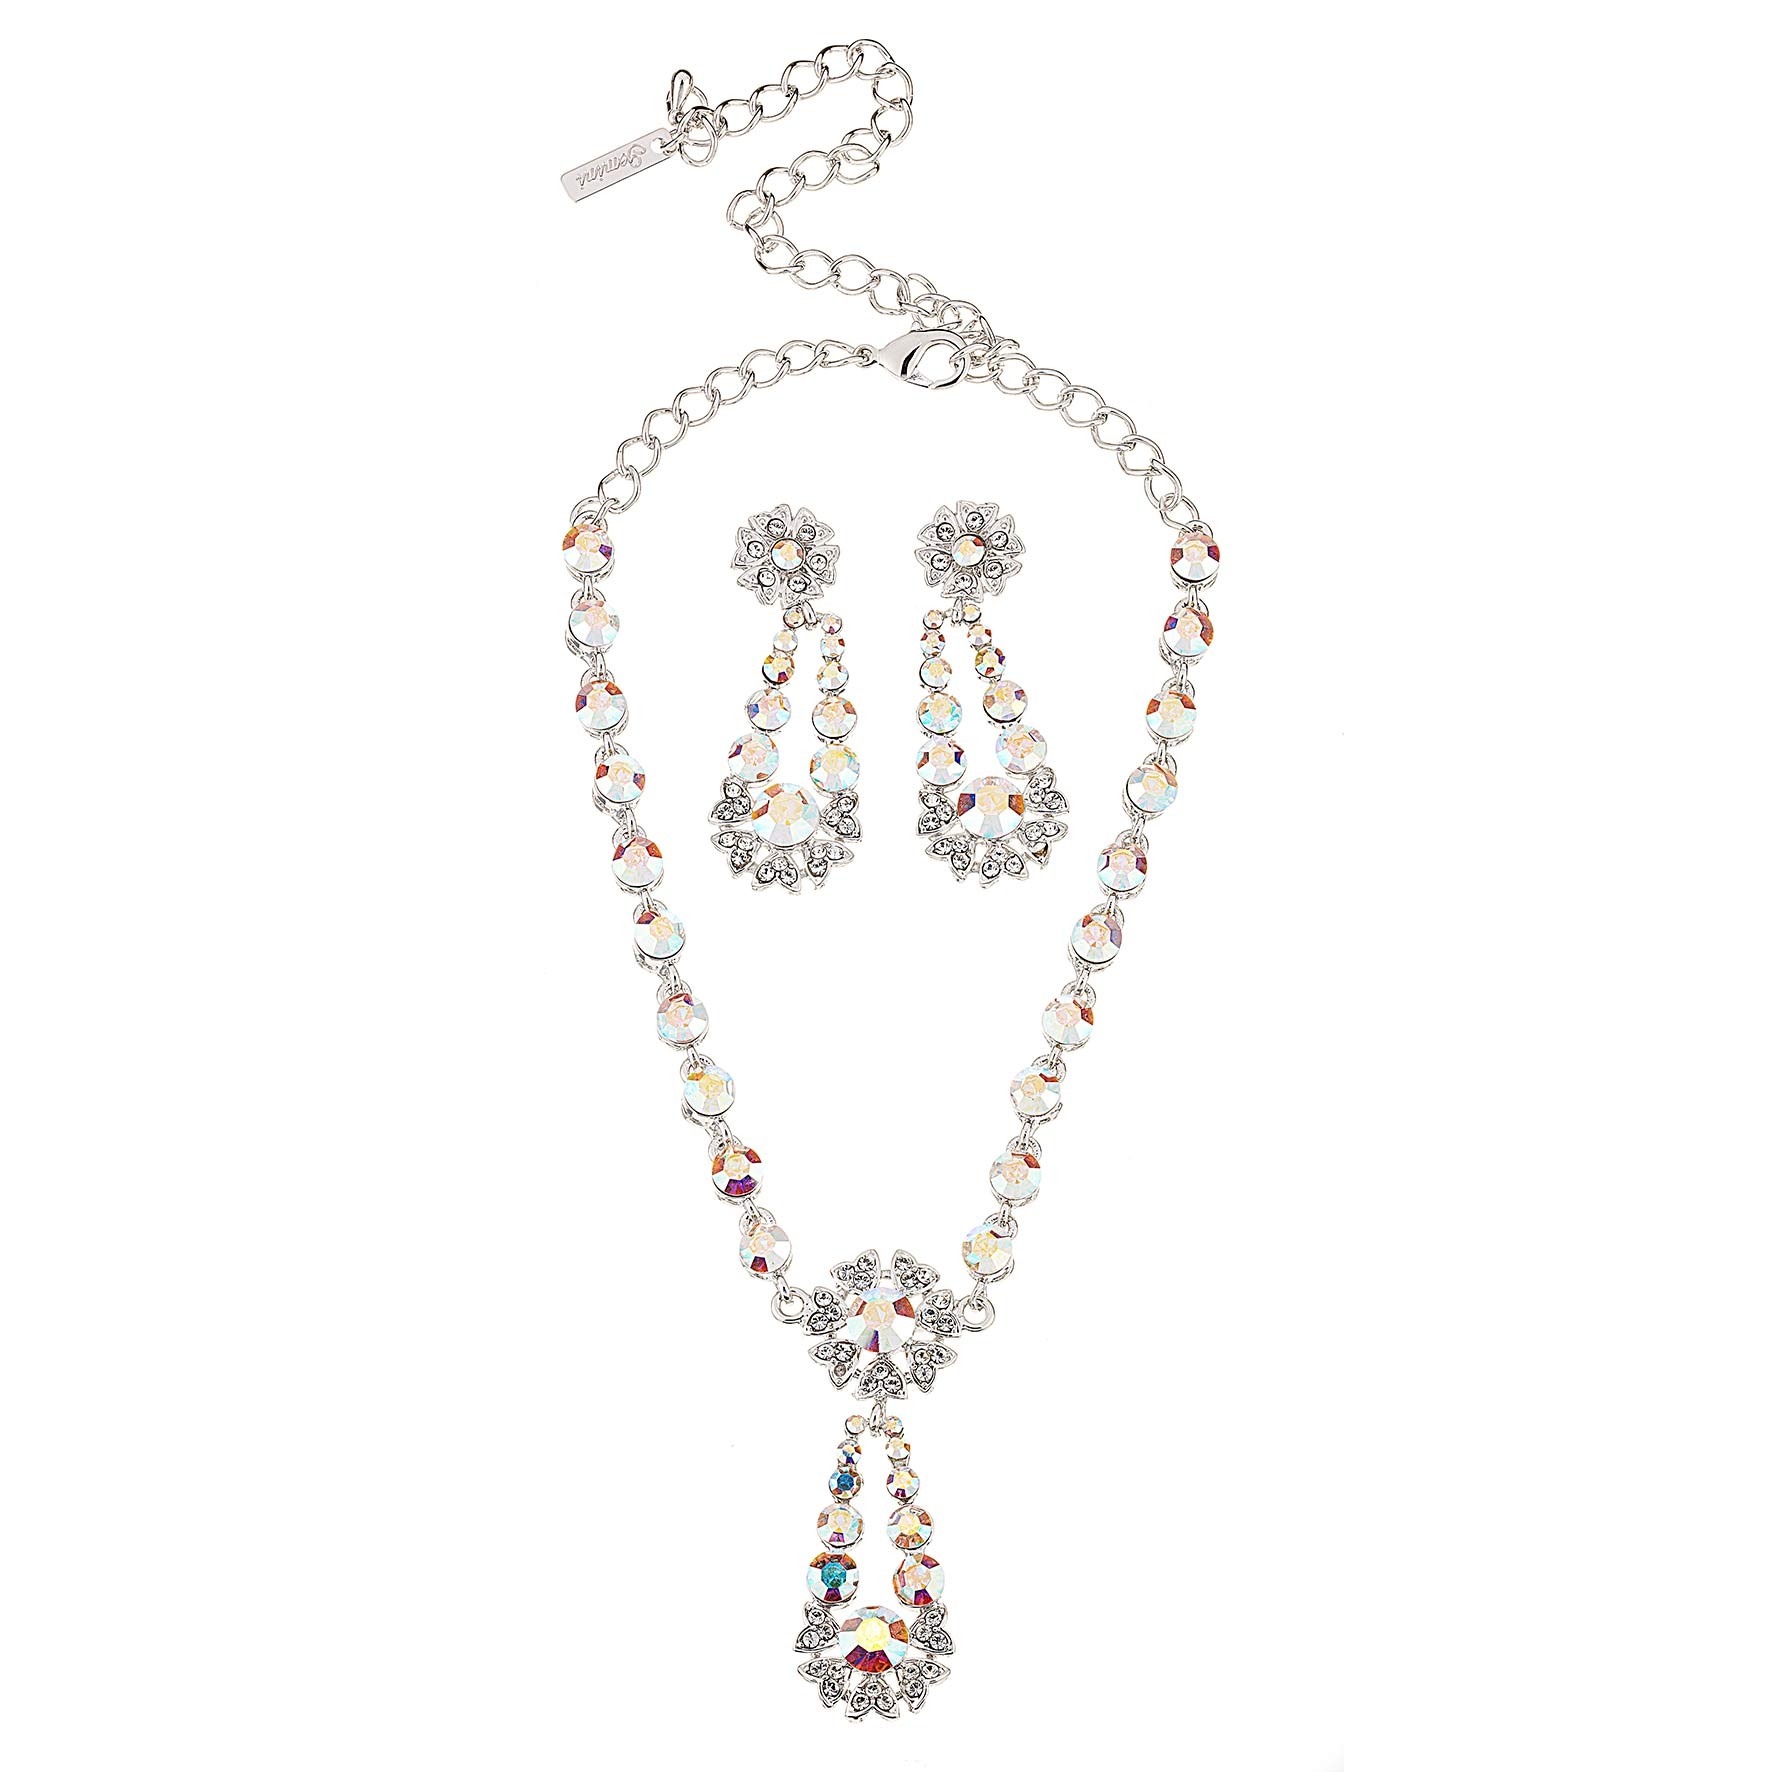 Swarovski Crystal AB Crystal Flower Pendant Drop Necklace and Earrings ...